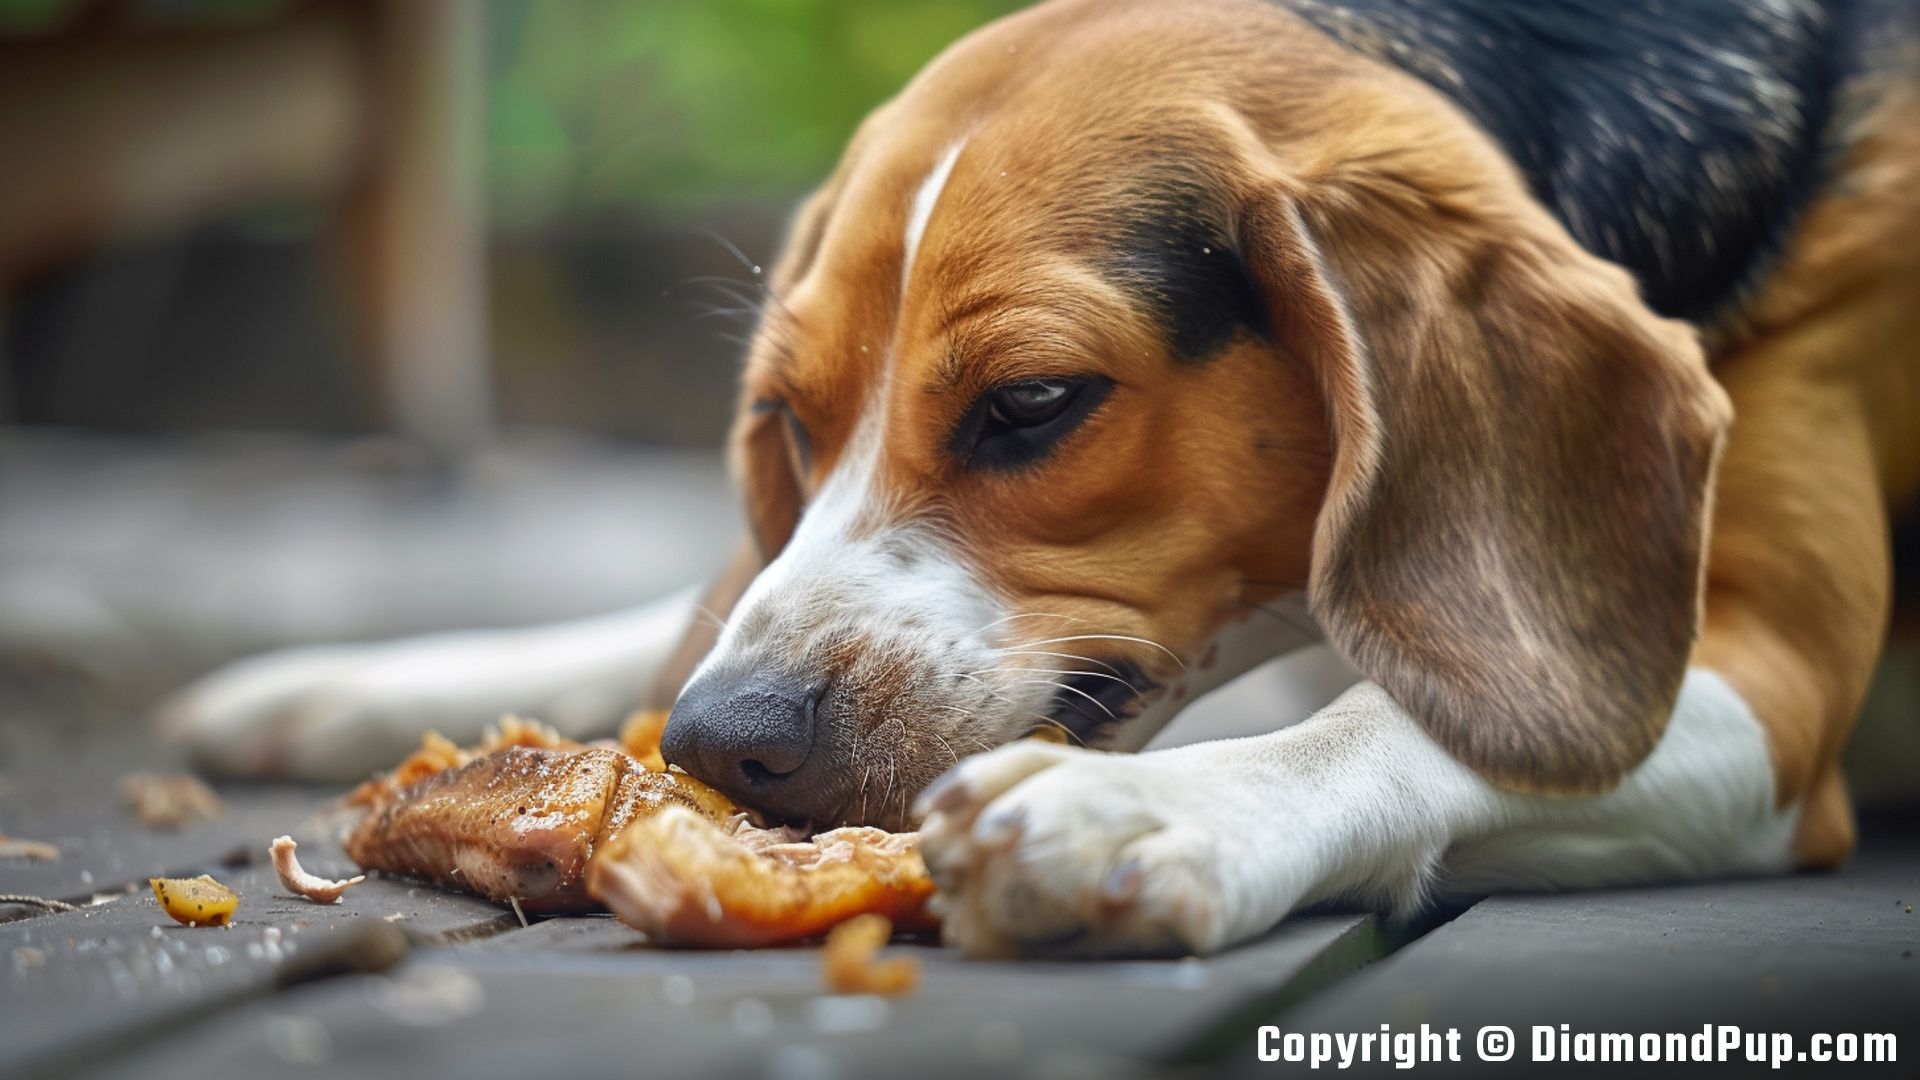 Photograph of an Adorable Beagle Snacking on Chicken